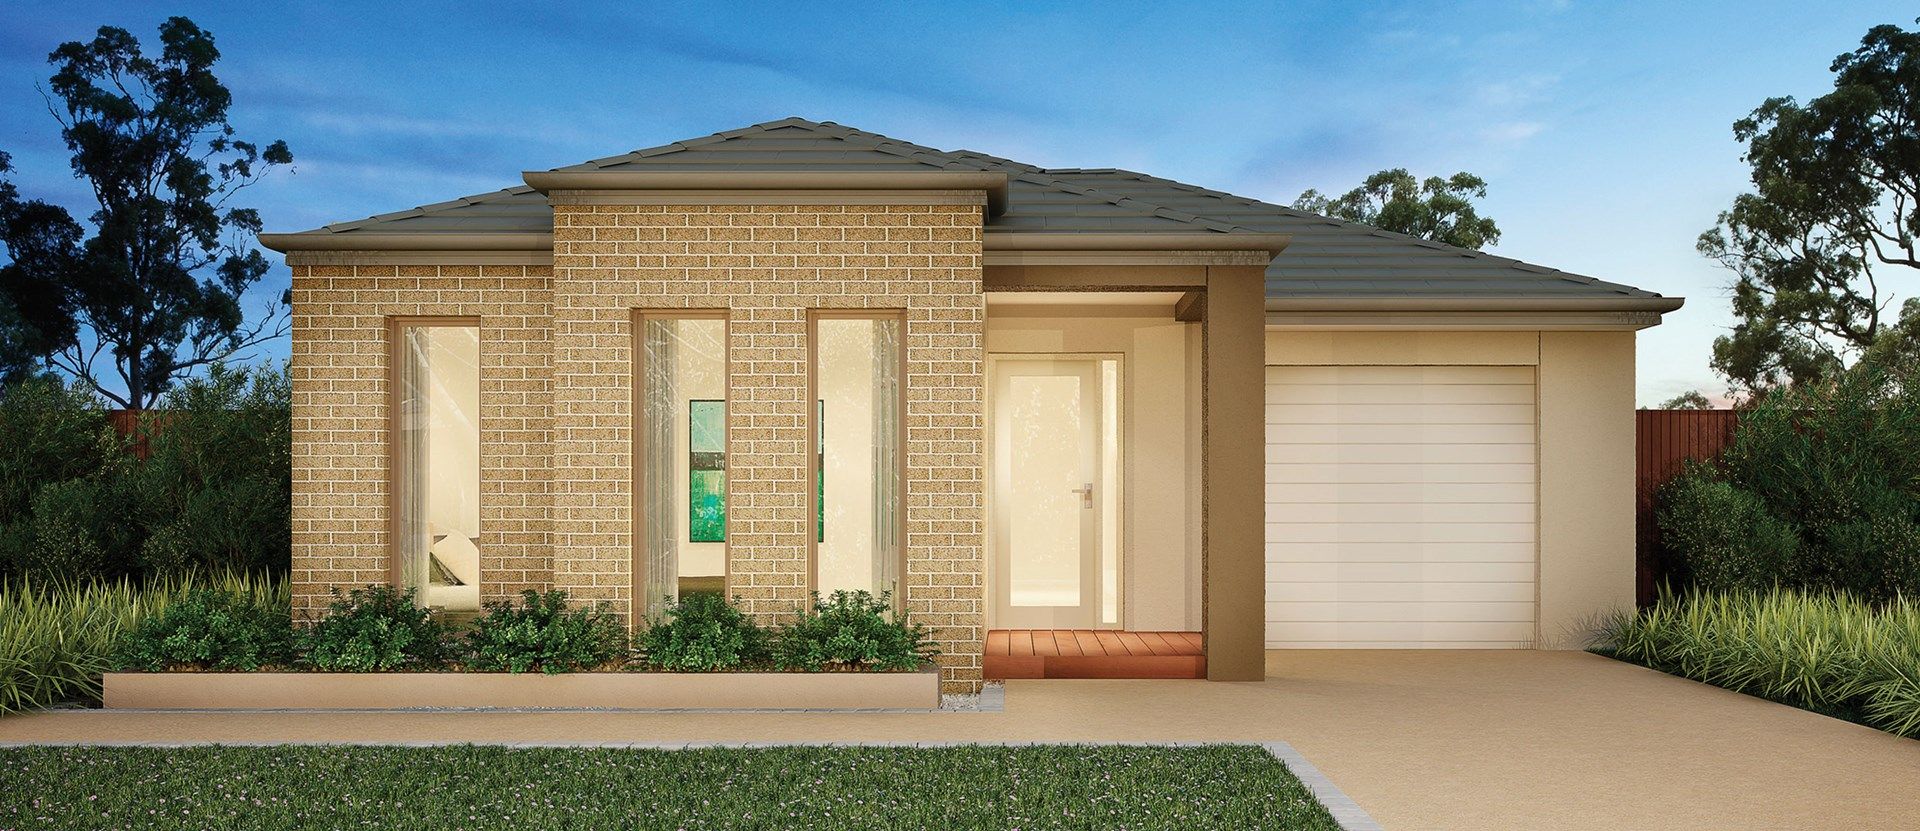 Carradale Road Smiths Park 3978, Lot: 1237, Clyde North VIC 3978, Image 0